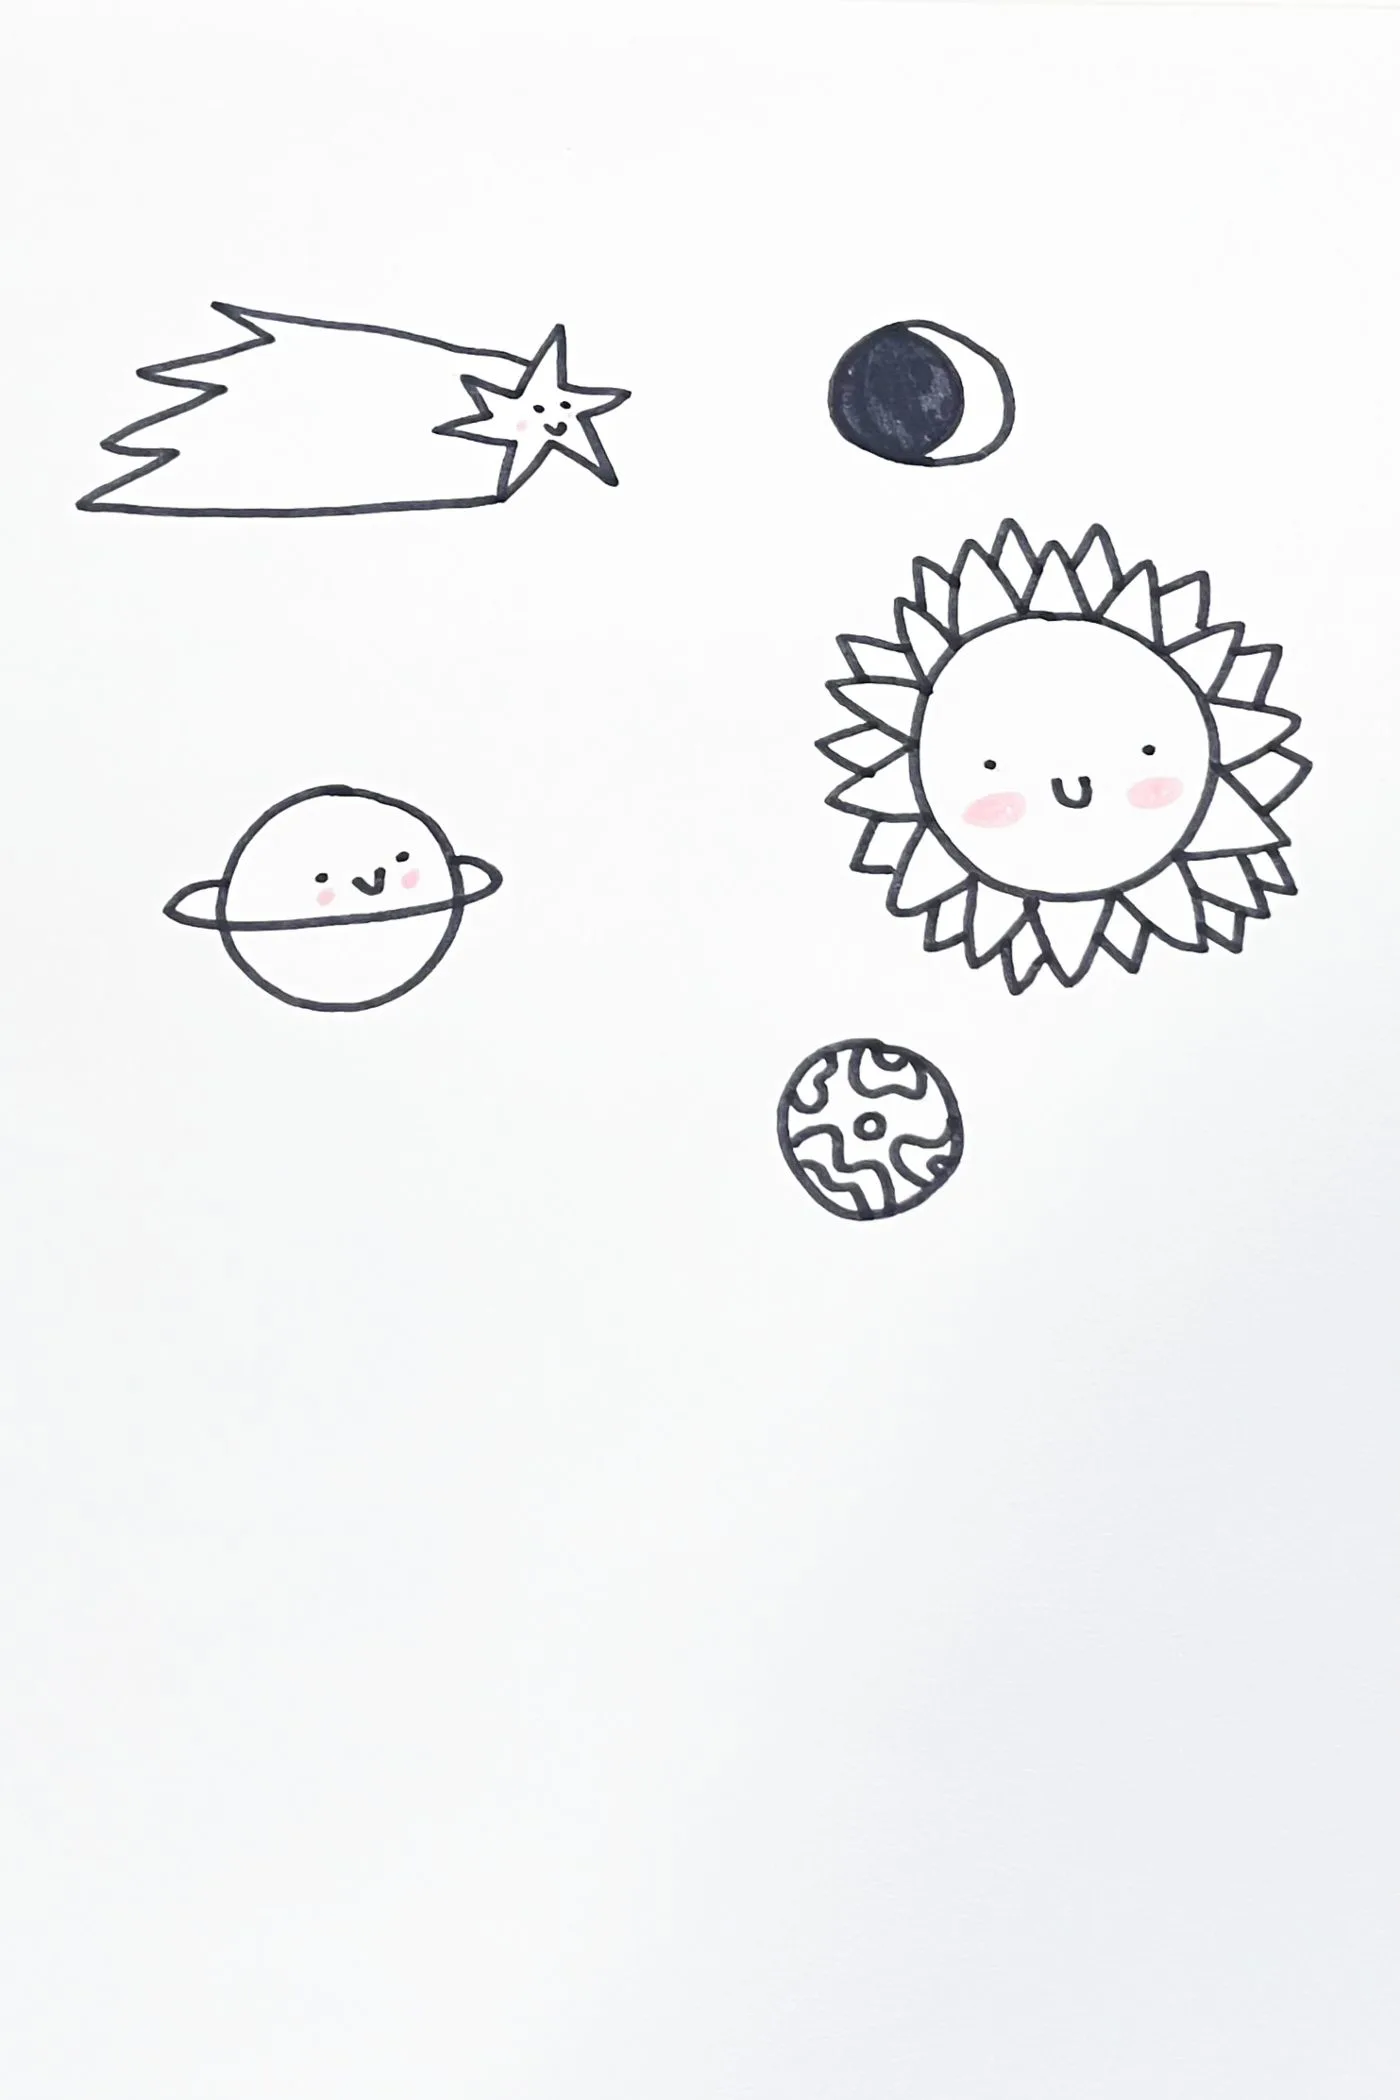 smiling stars and planets drawing idea